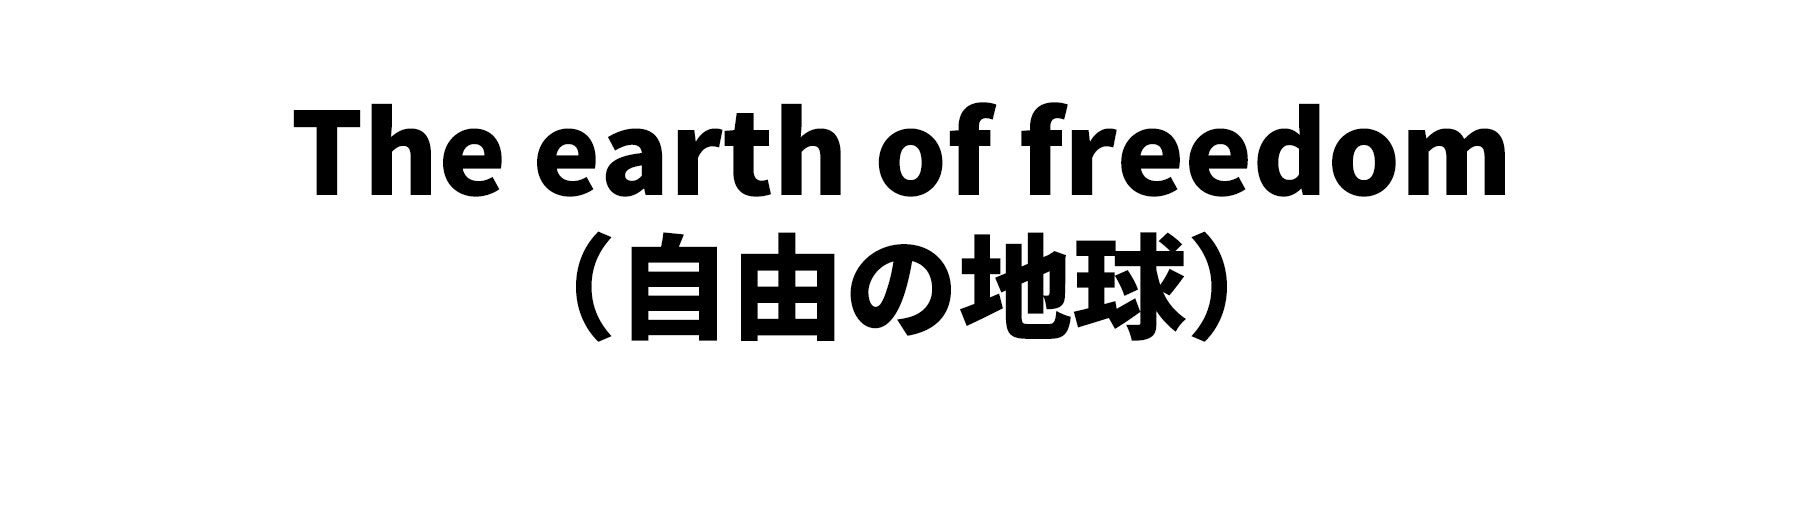 The earth of freedom（自由の地球）